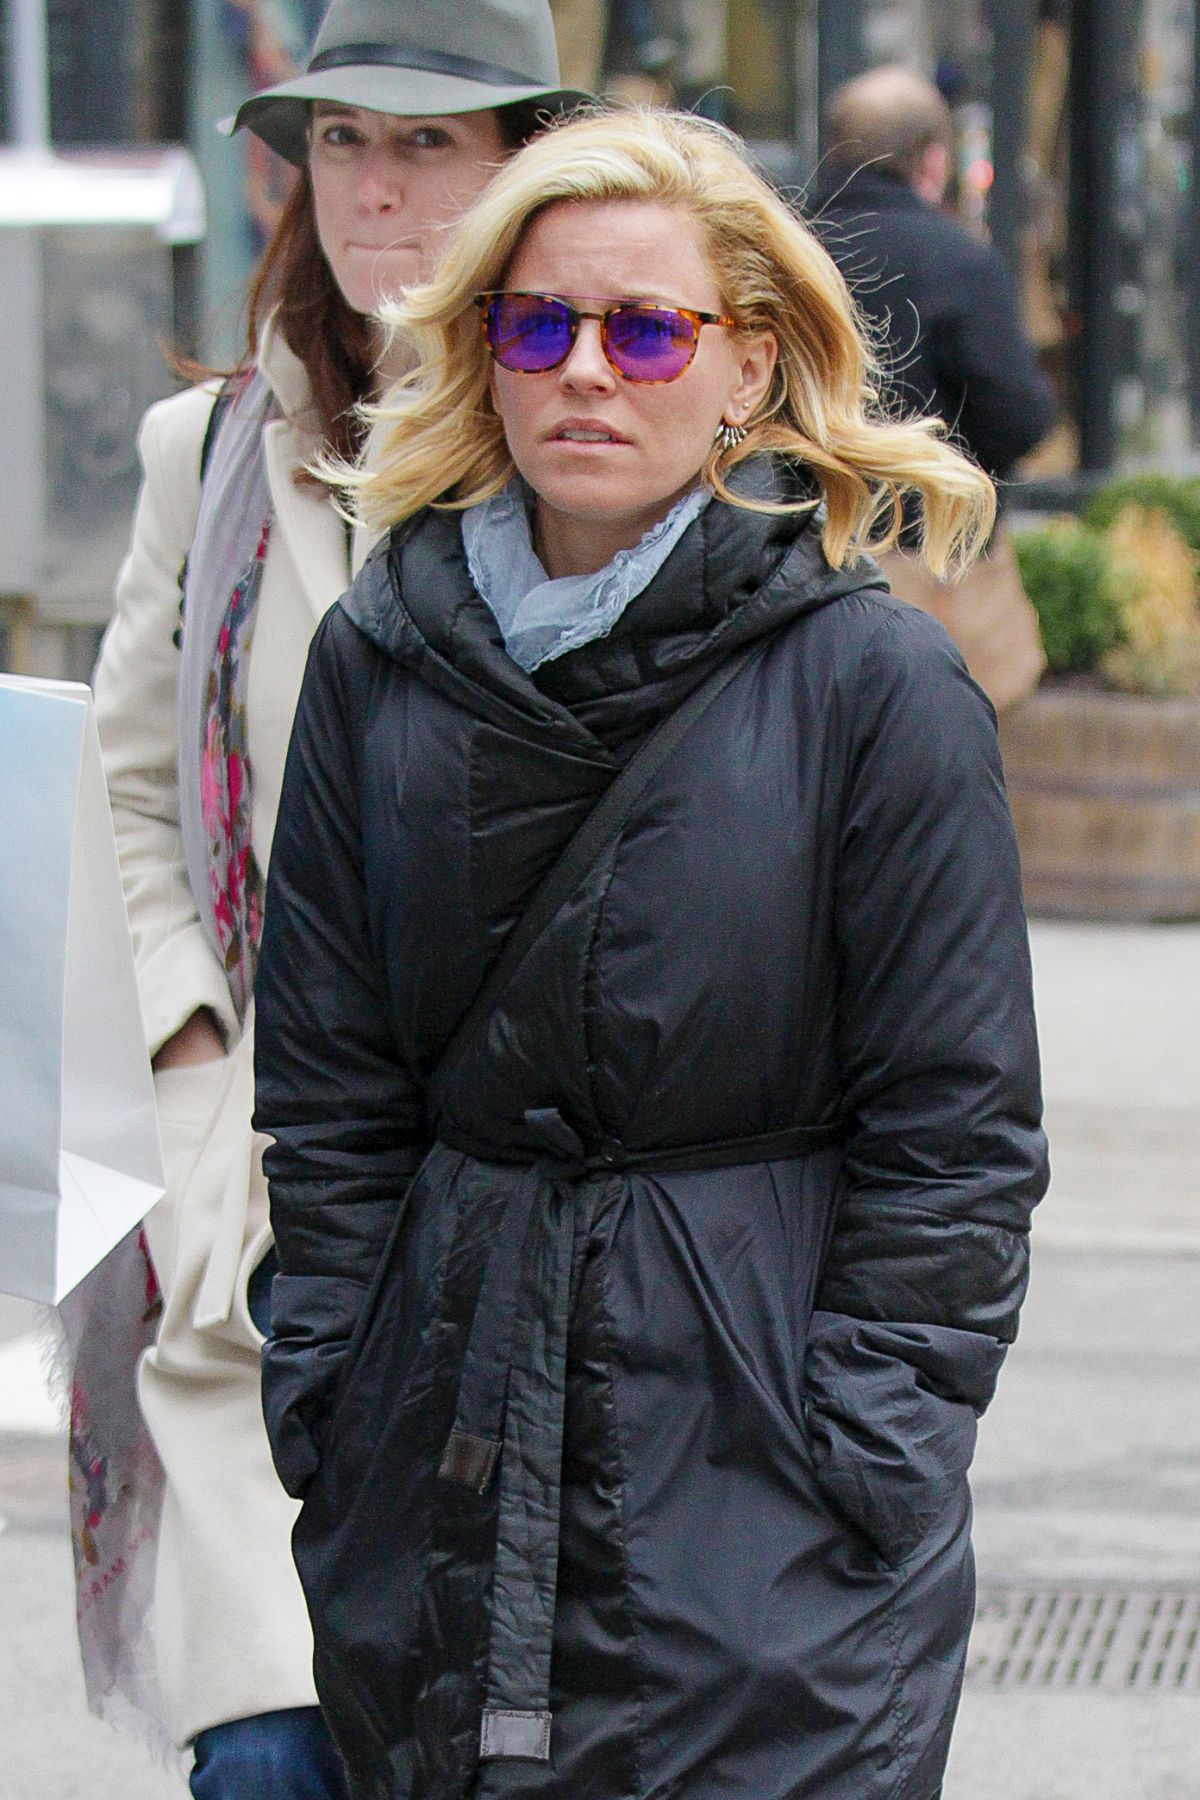 ELIZABETH BANKS Out and About in New York.